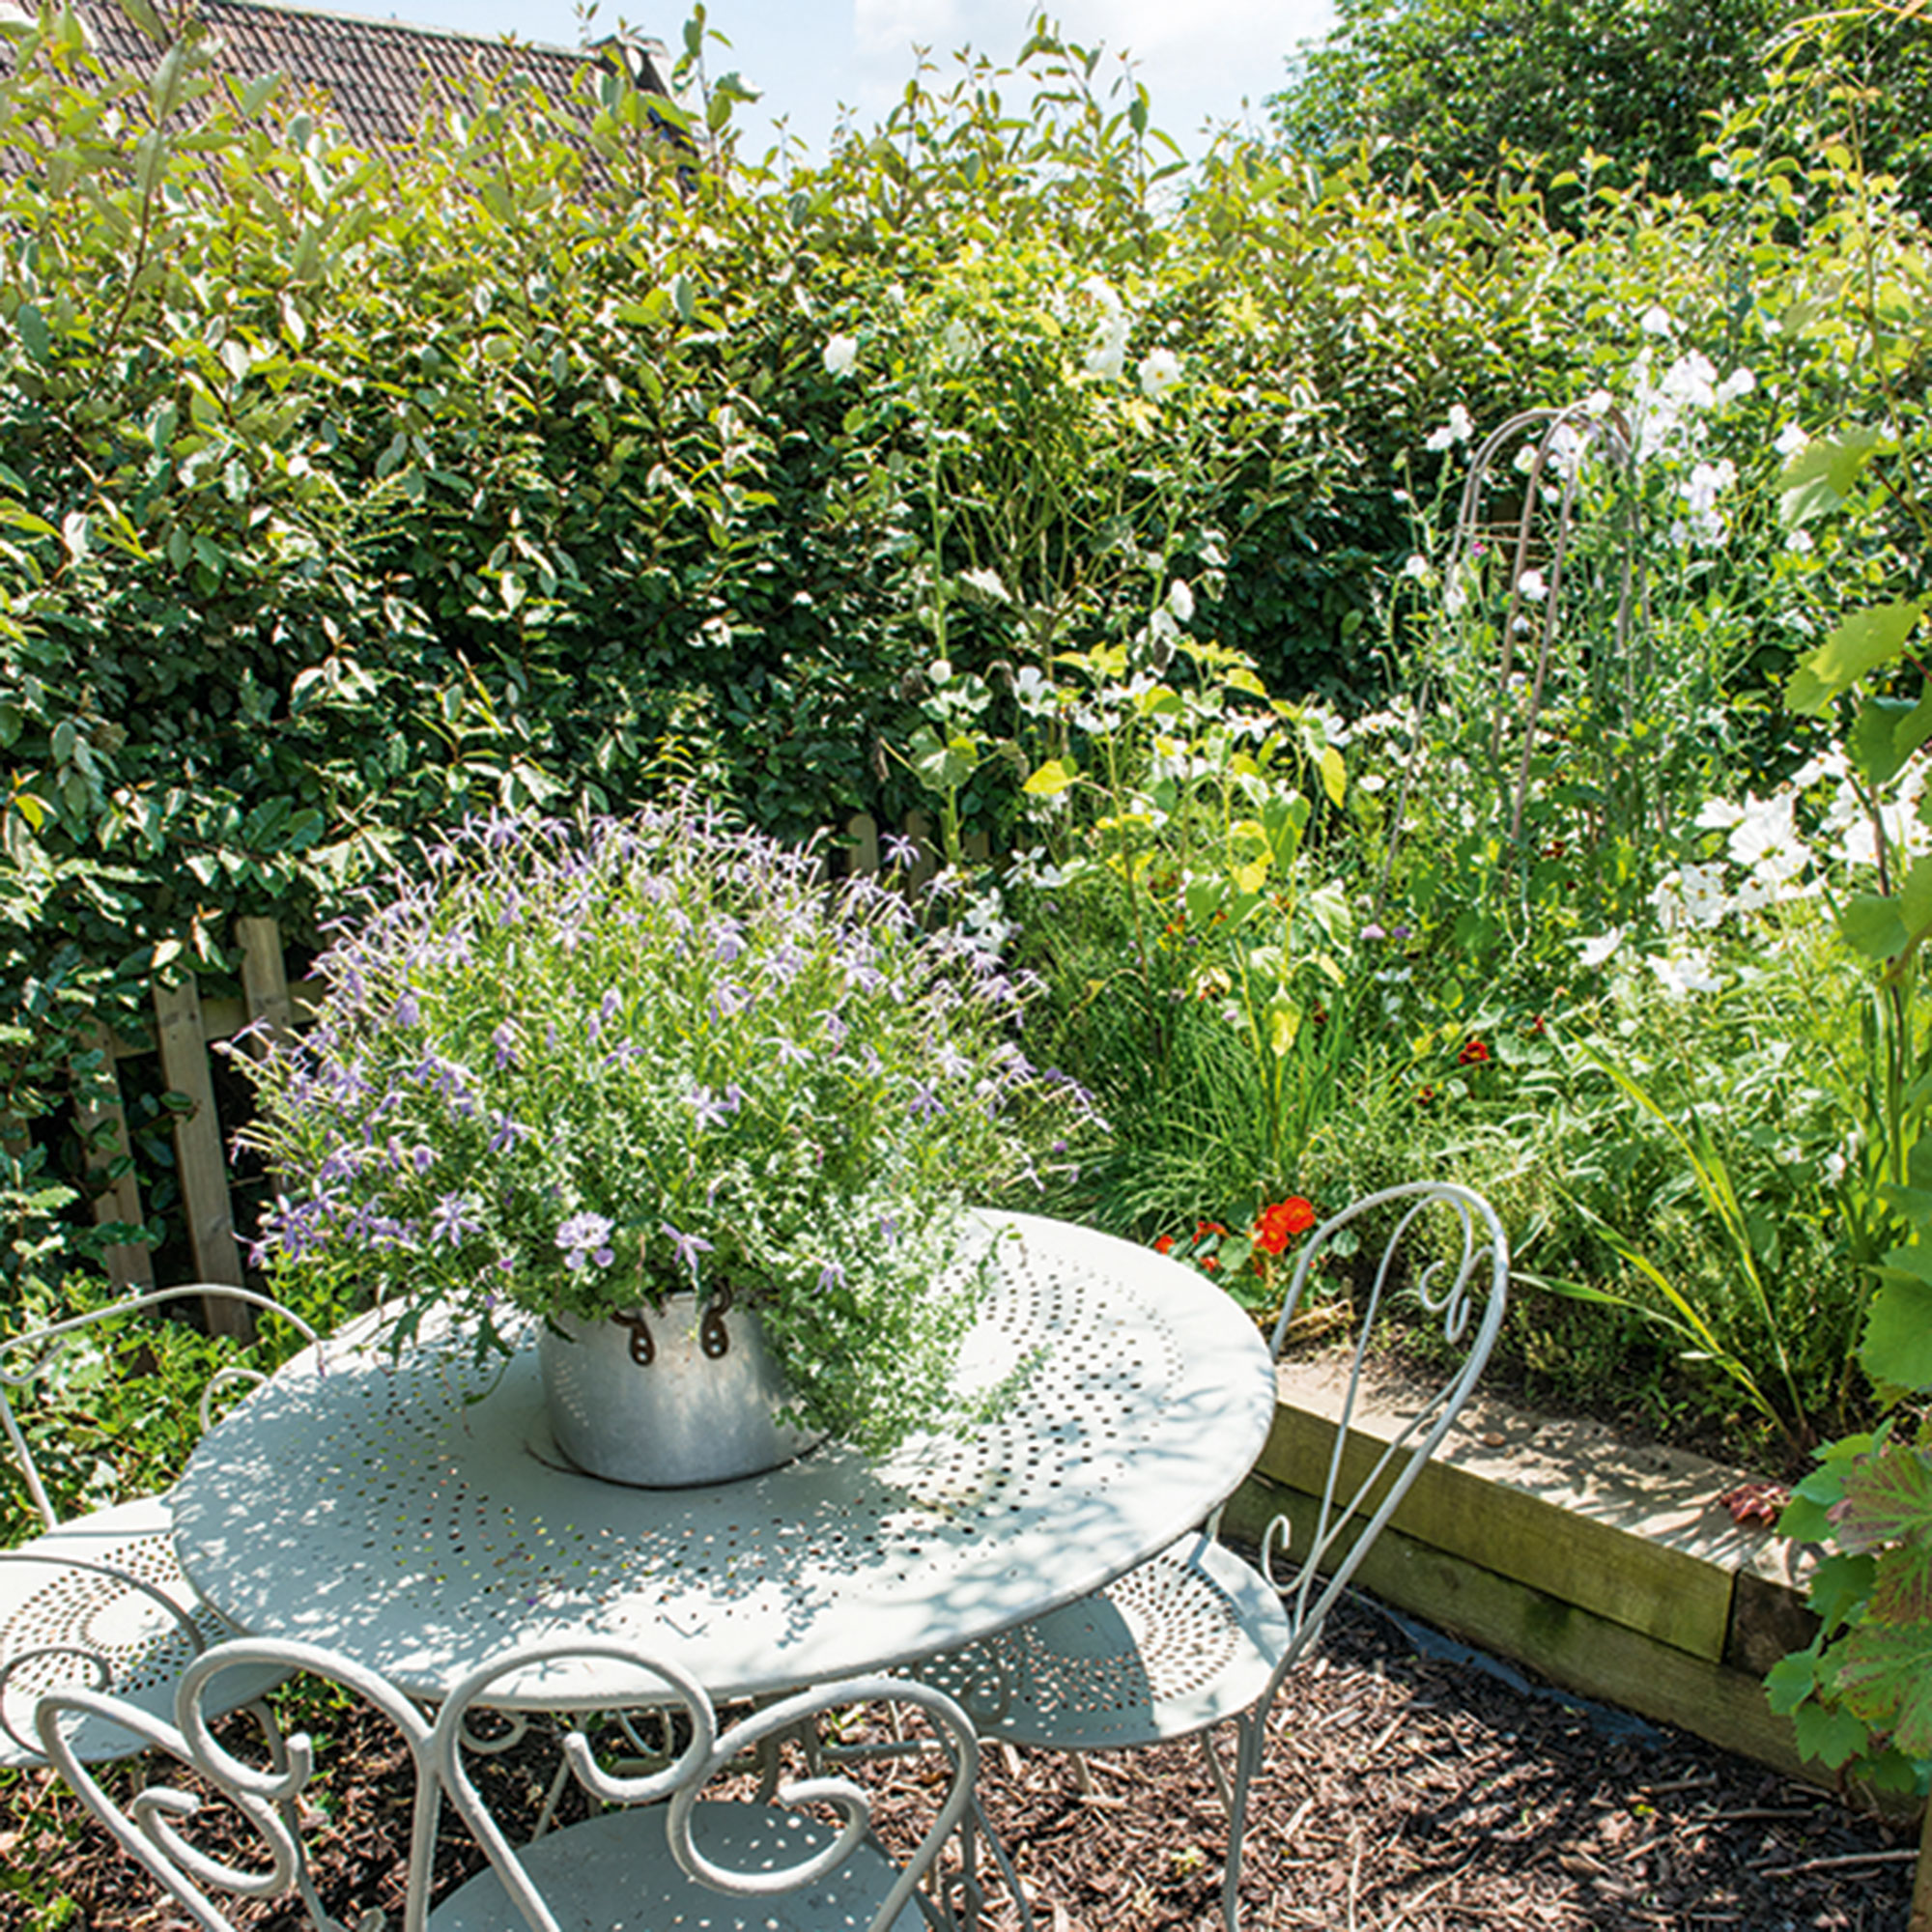 Garden with metal table and chairs surrounded by wild planting